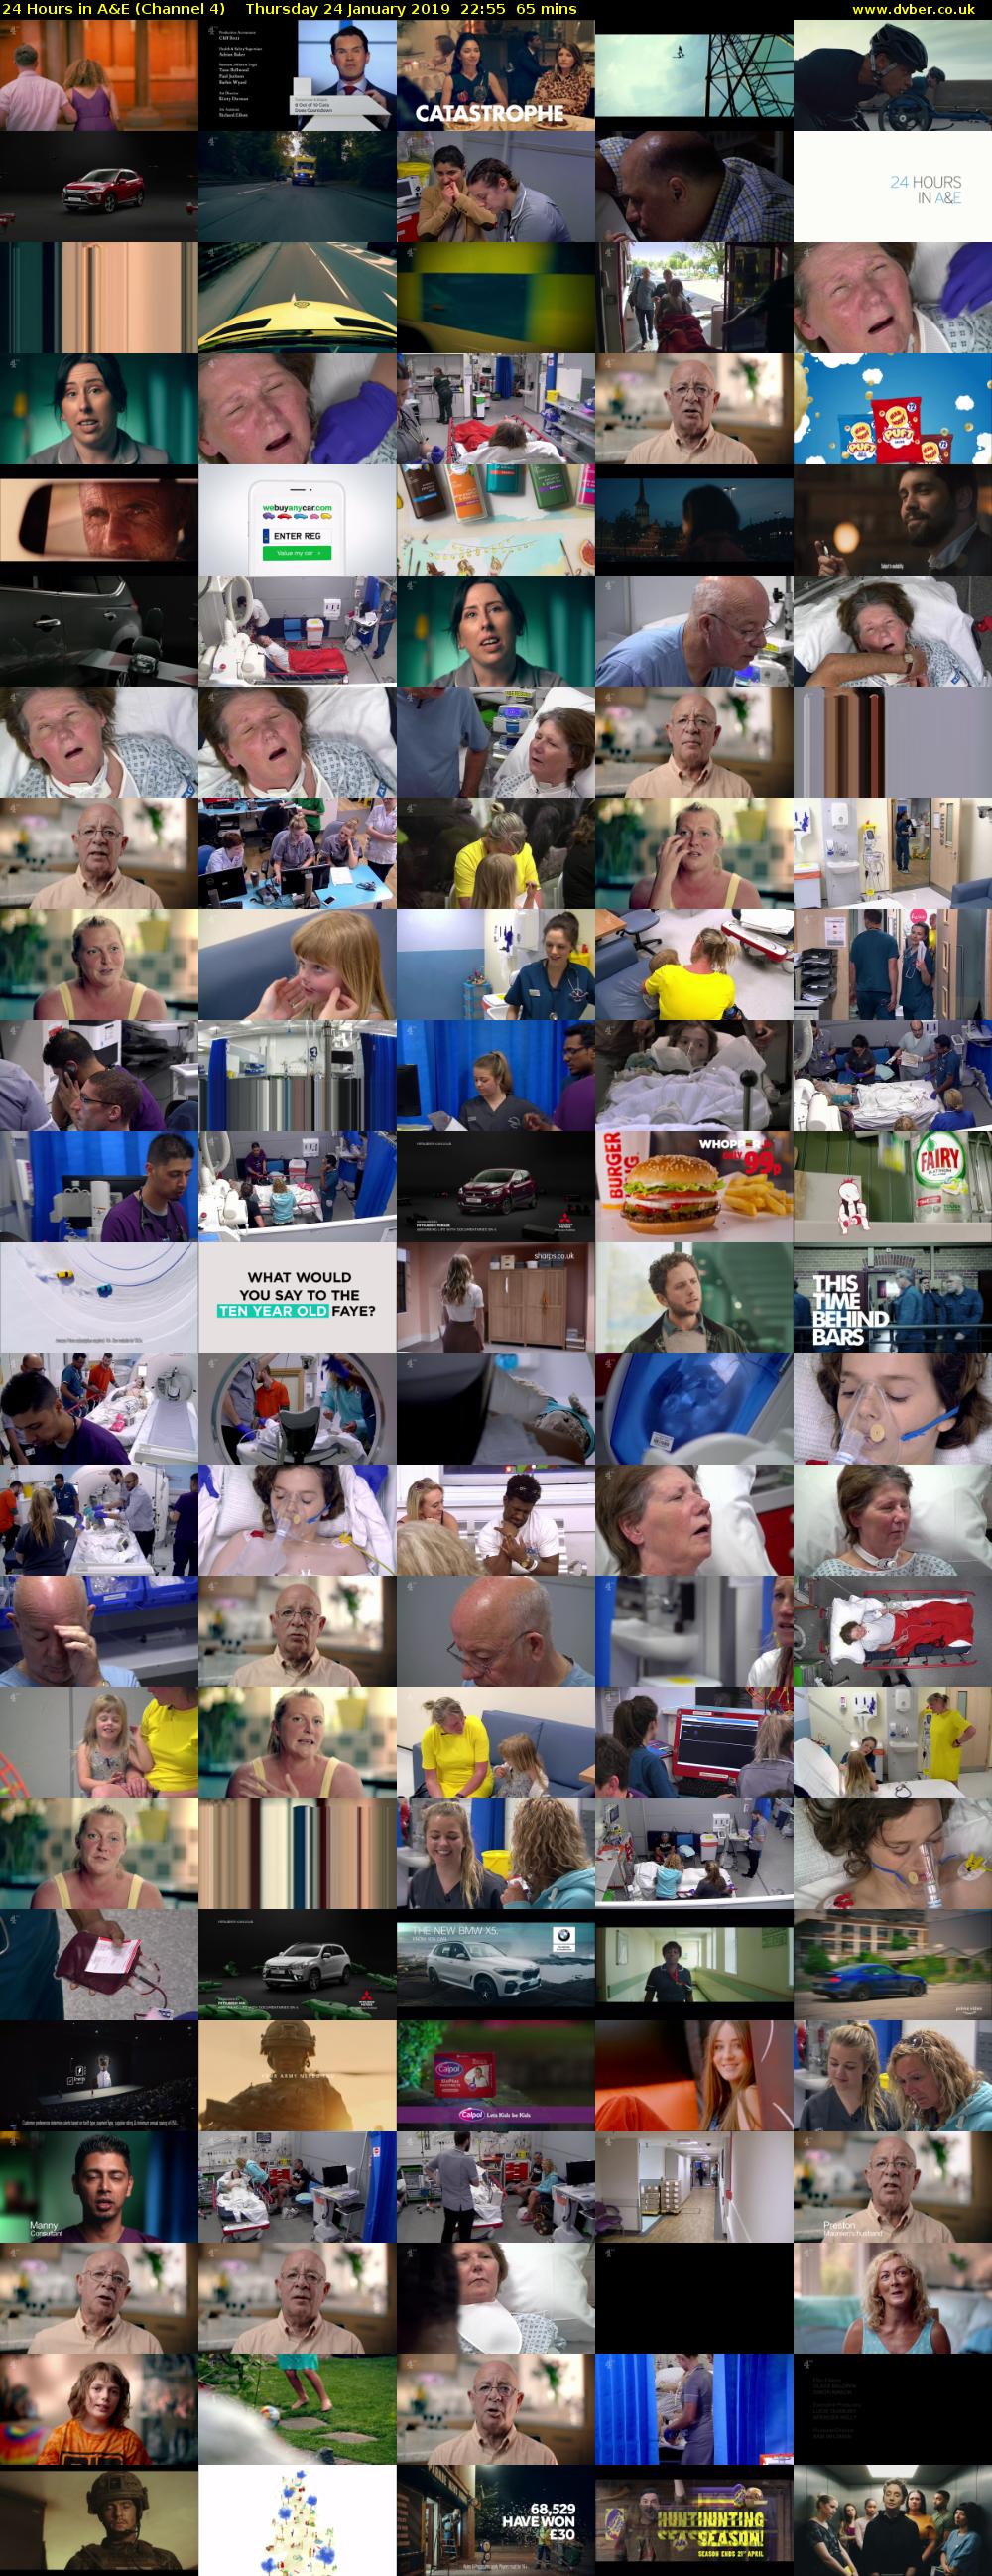 24 Hours in A&E (Channel 4) Thursday 24 January 2019 22:55 - 00:00